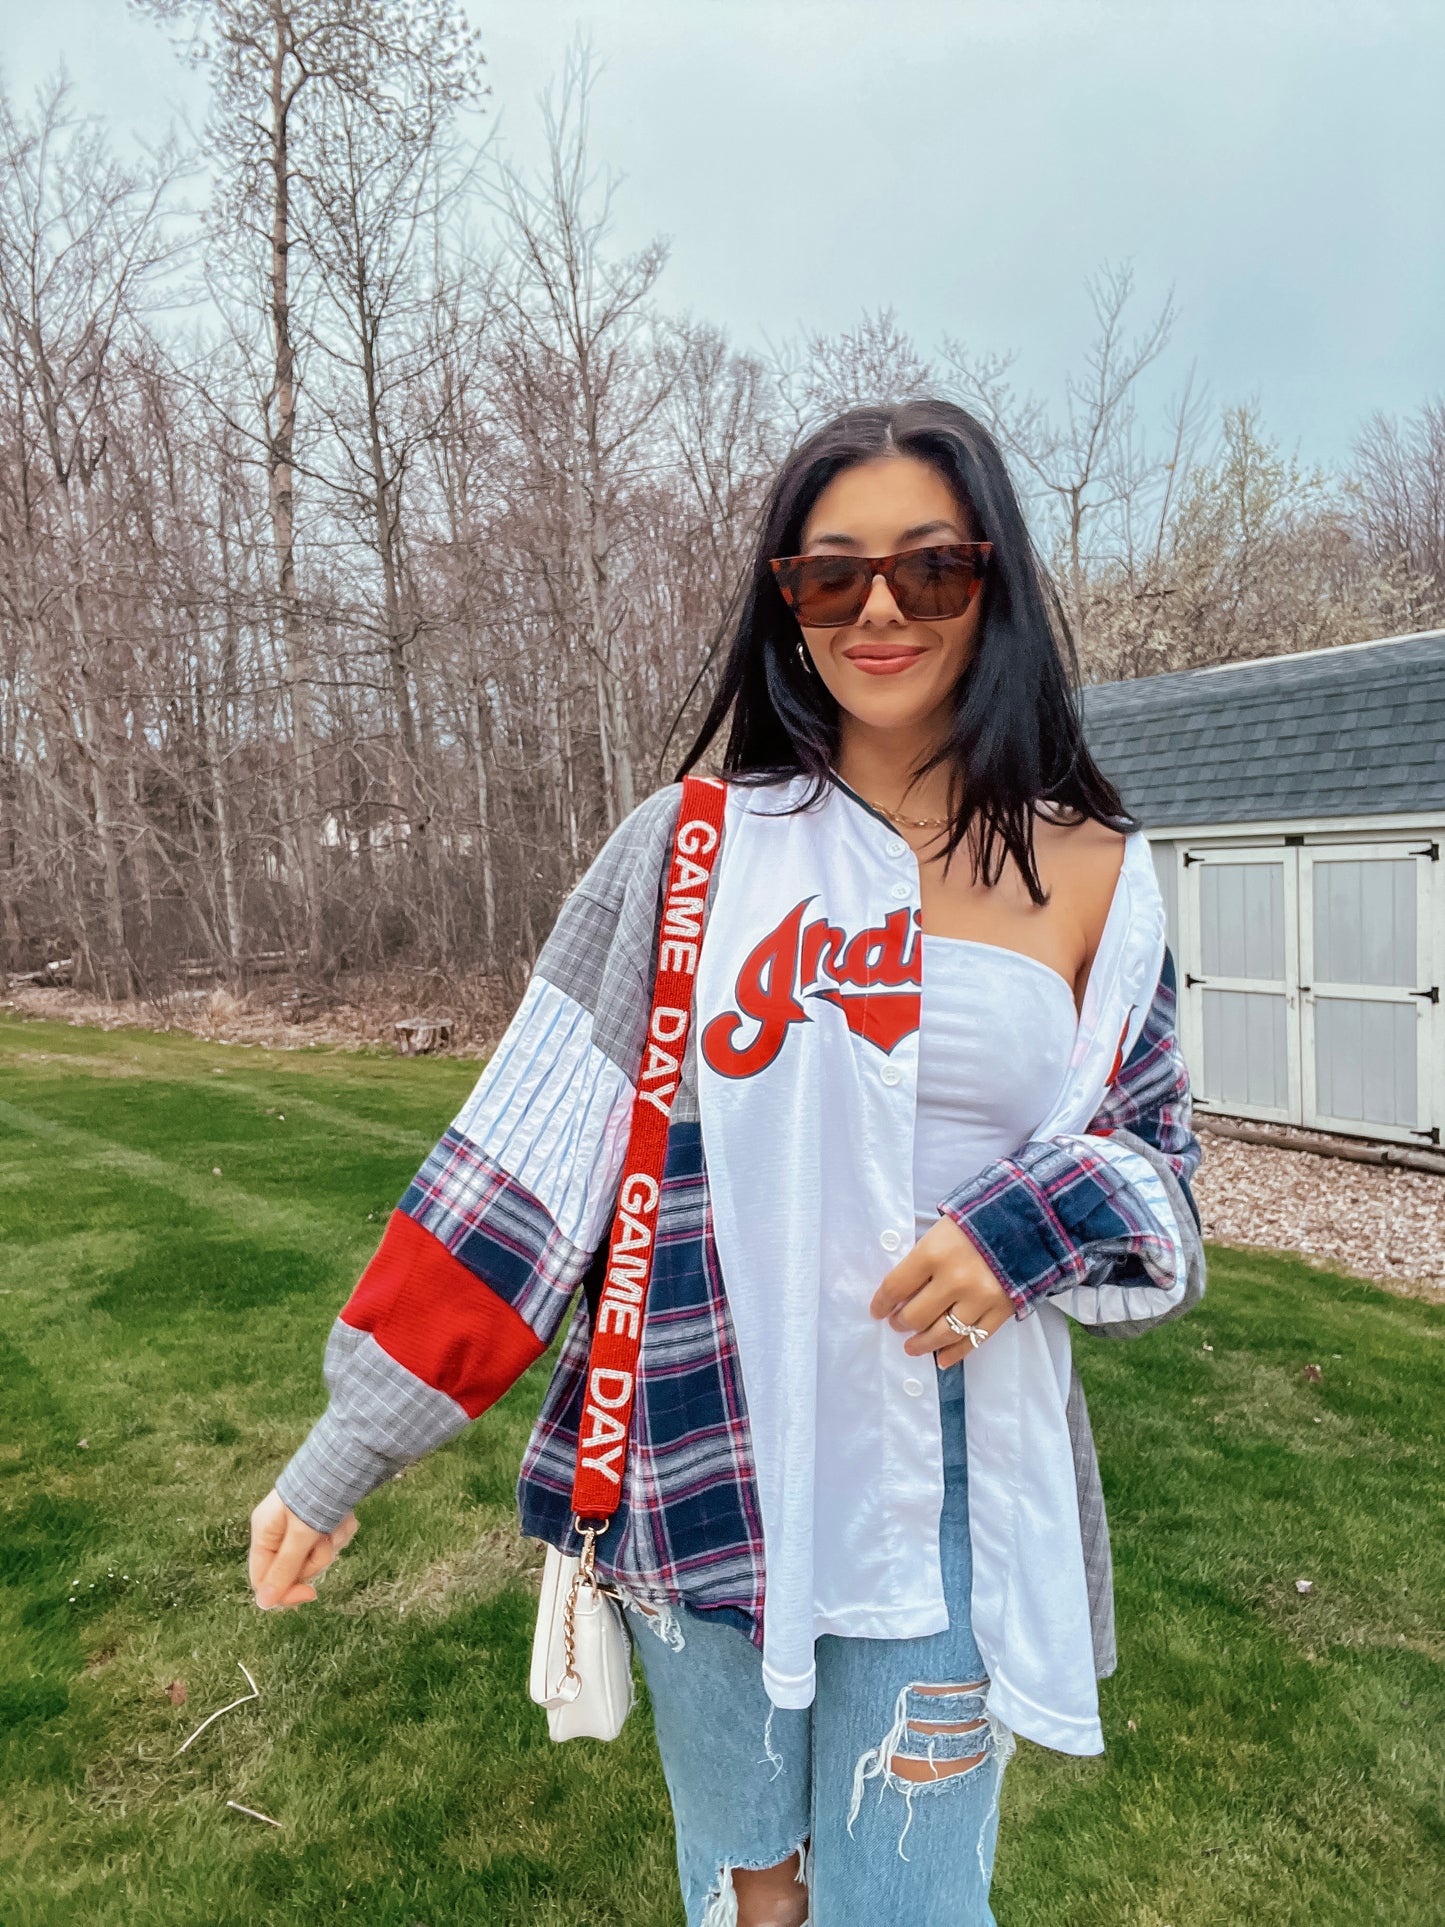 INDIANS PATCHWORK JERSEY X FLANNEL